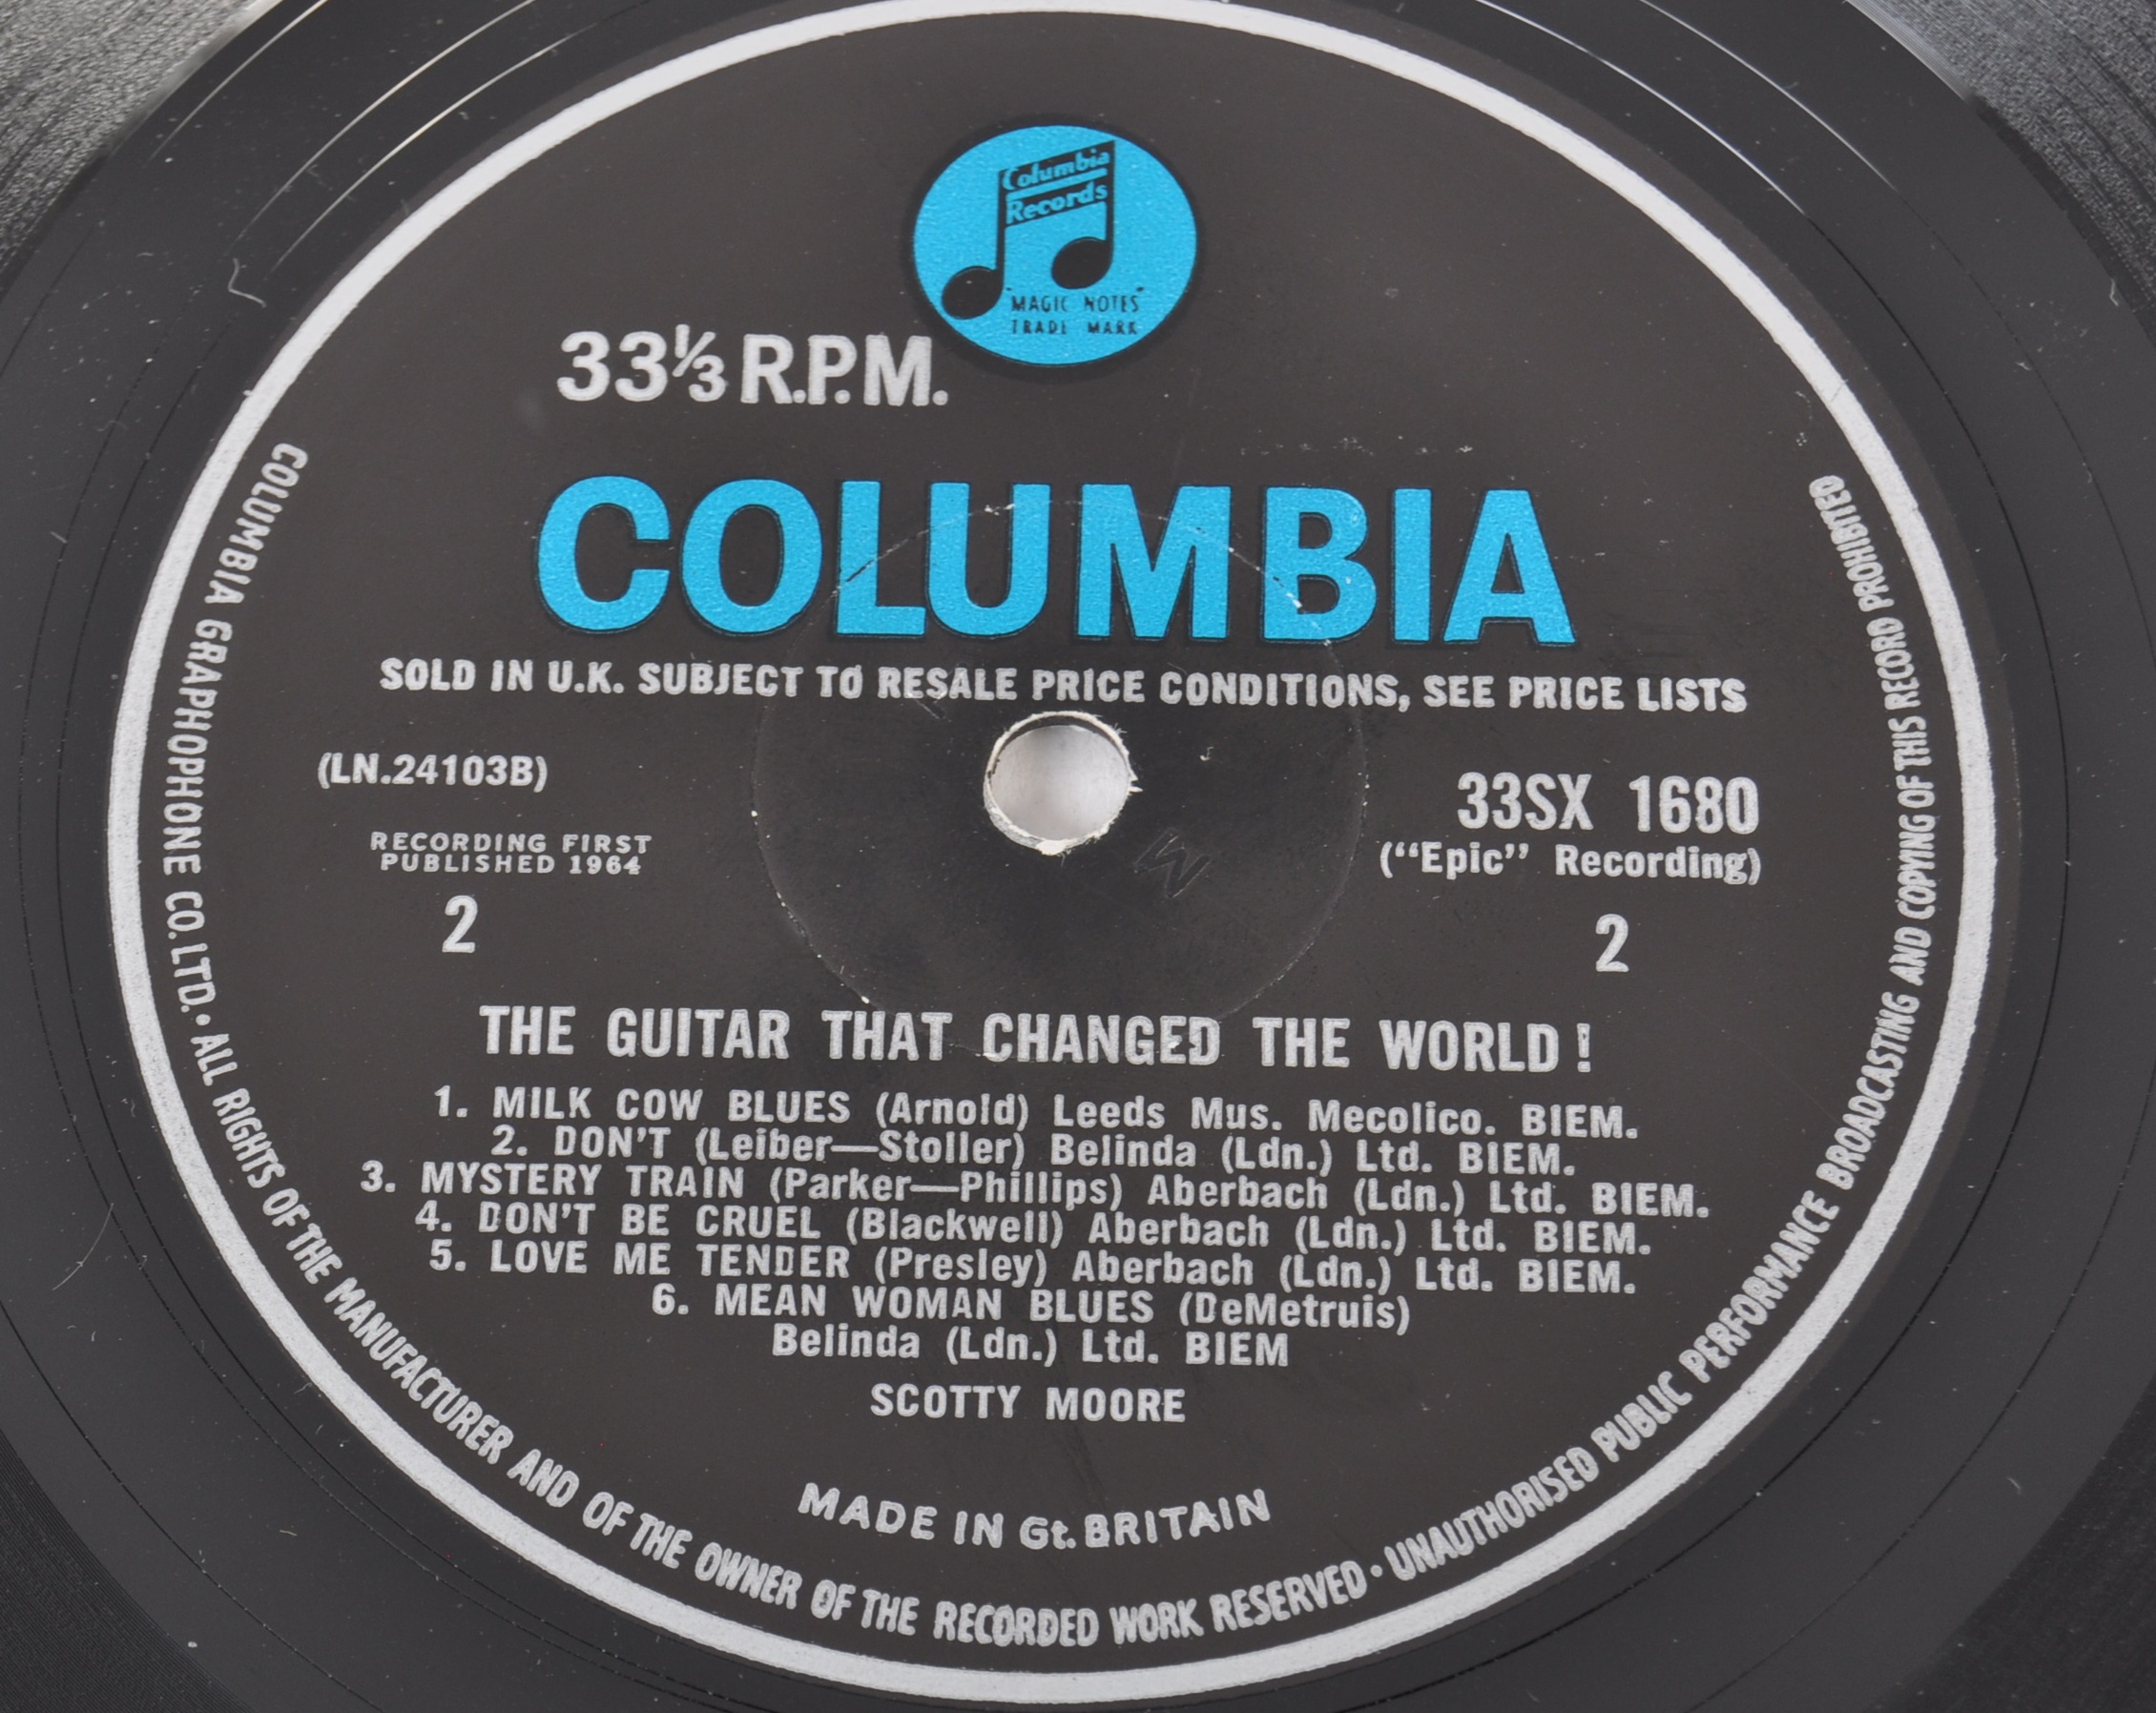 SCOTTY MOORE - THE GUITAR THAT CHANGED THE WORLD! - 1964 COLUMBIA RELEASE - Image 4 of 4